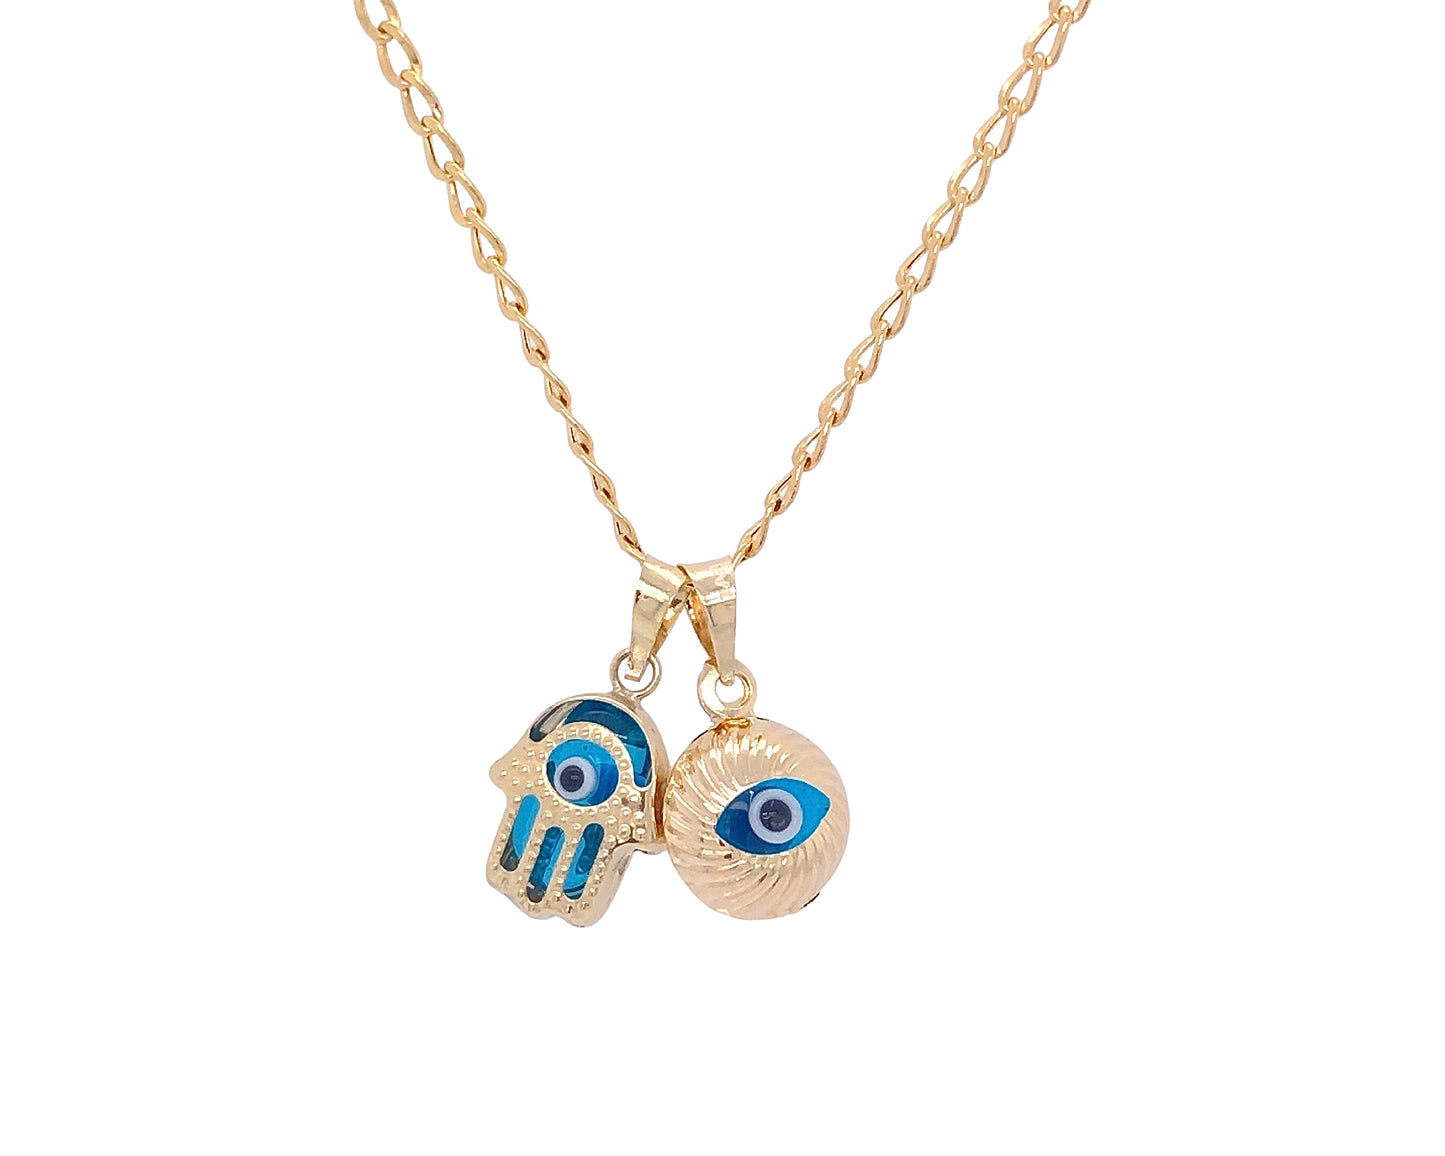 10k yellow gold necklace with 2 evil eye charms 